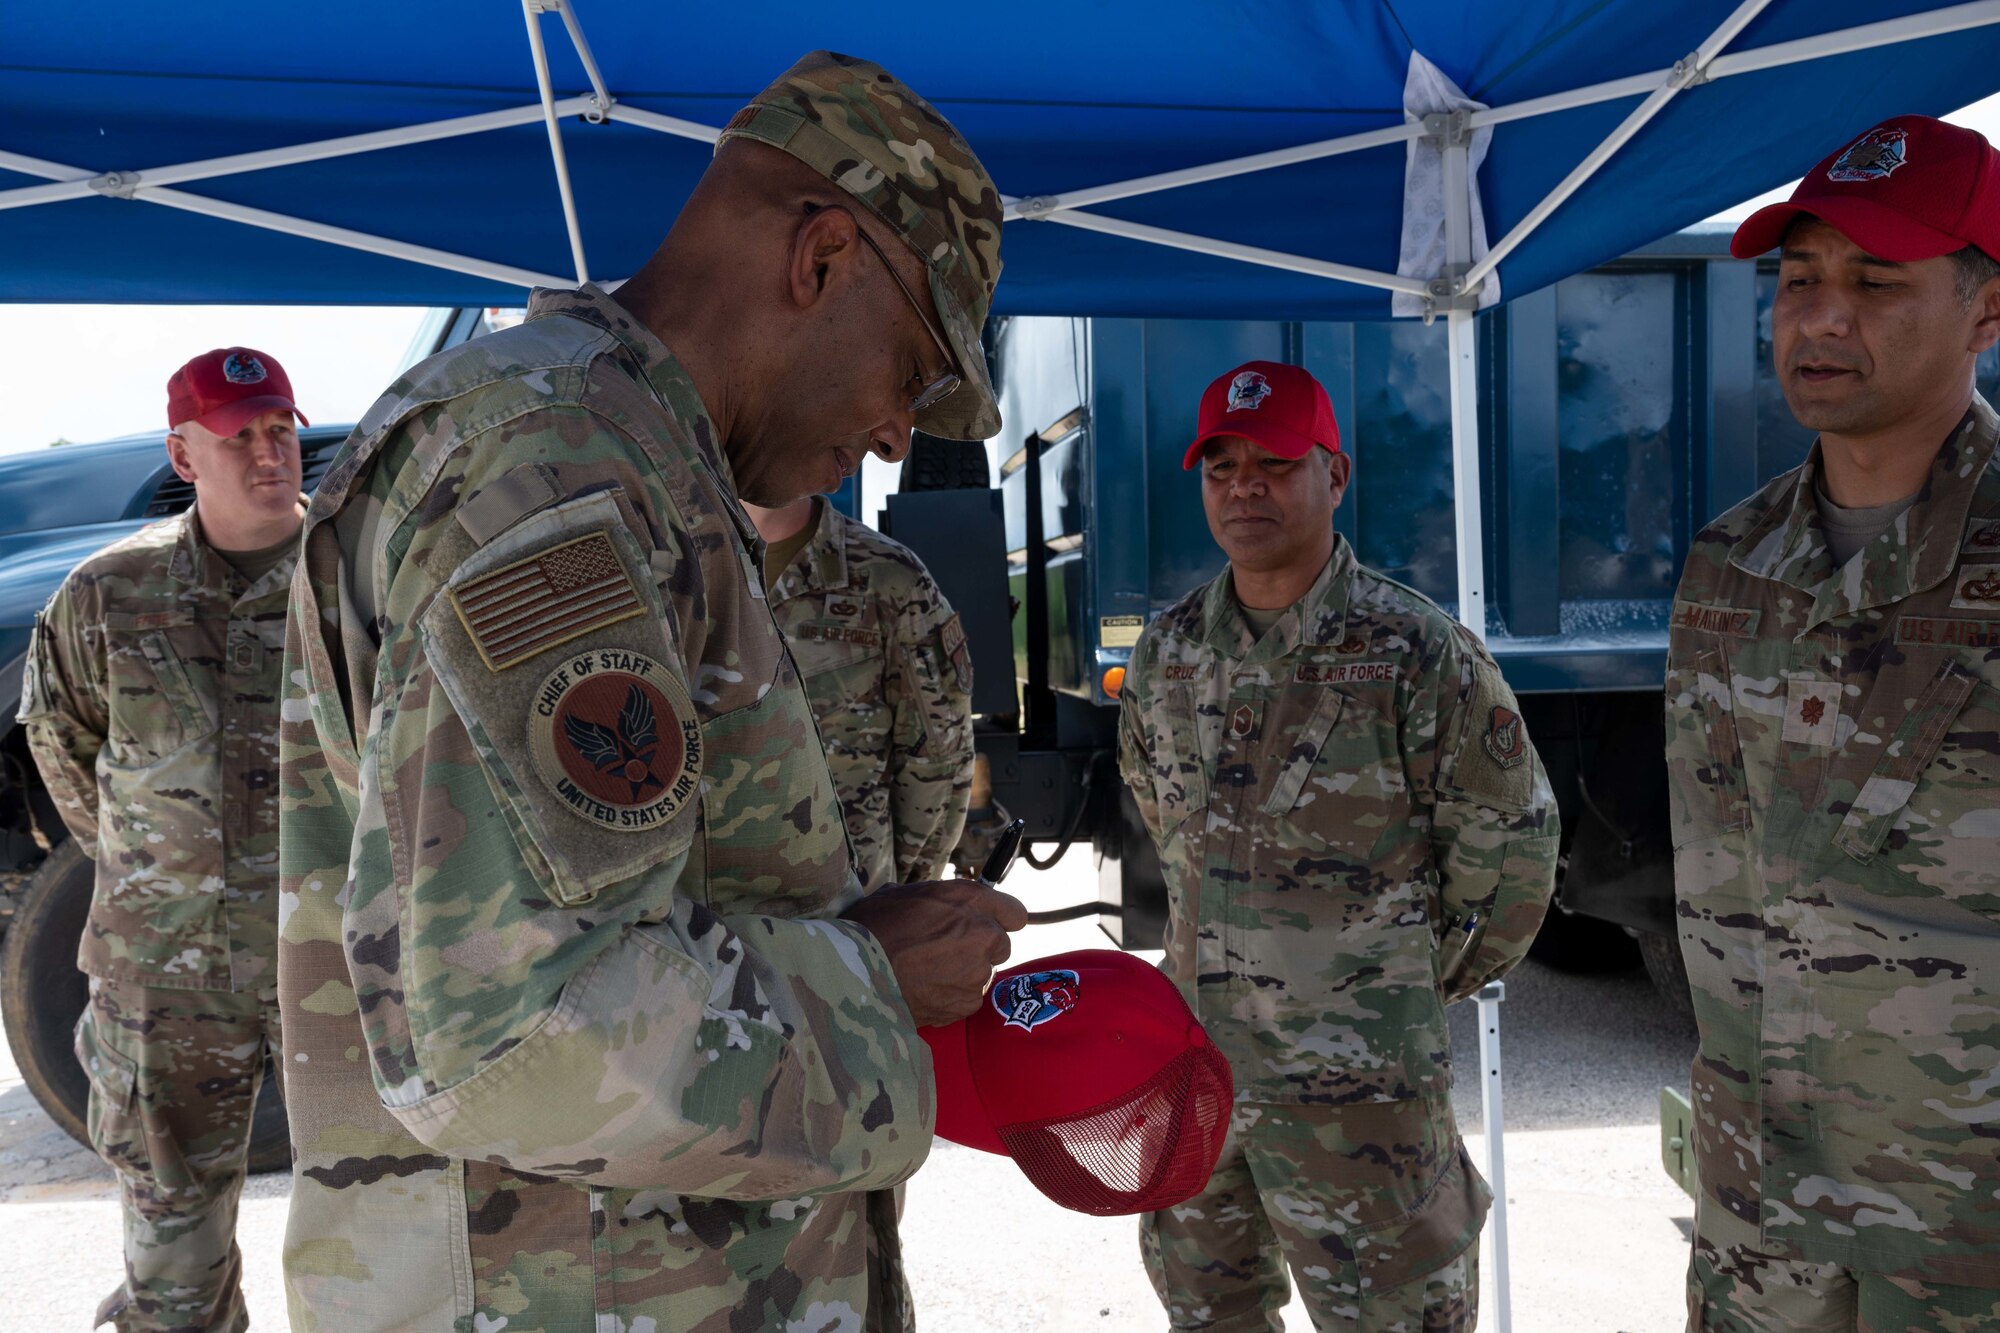 U.S. Air Force Chief of Staff Gen. CQ Brown, Jr. signs a hat for the 554 REDHORSE leadership at Northwest Field, Guam, Aug. 7, 2022.